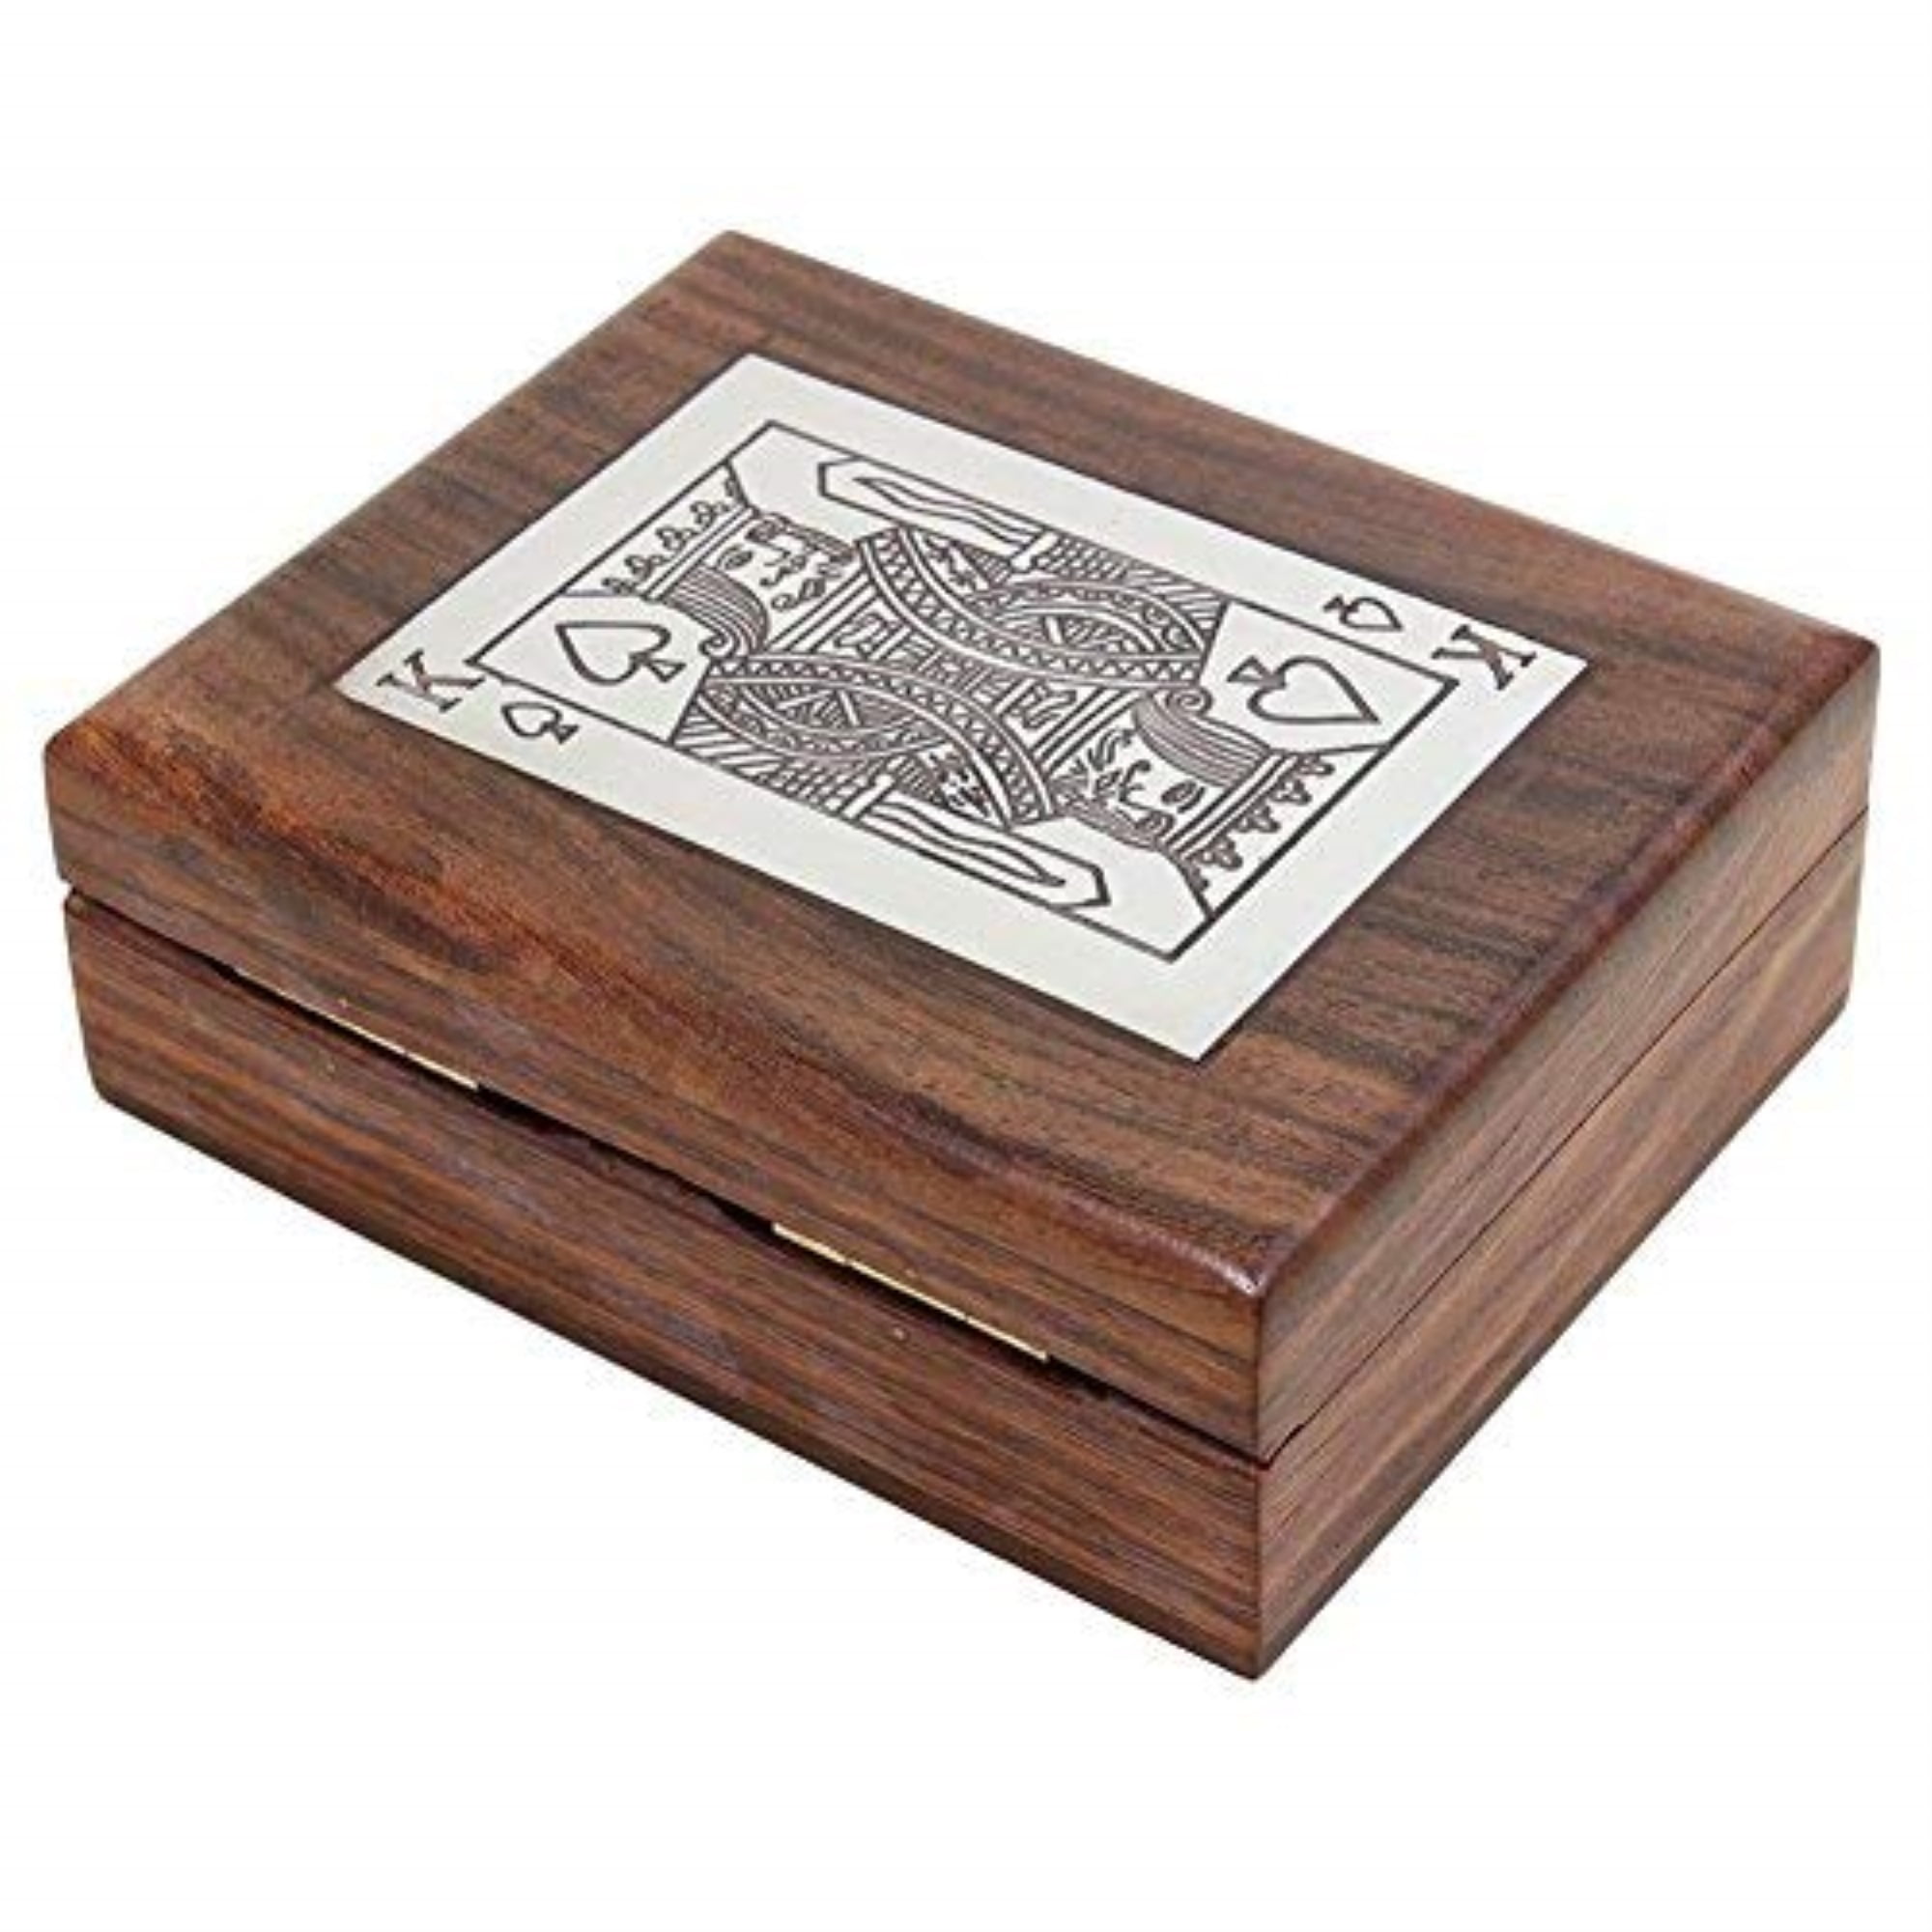 Wooden Box Playing Card Holder Decorative Brass Inlay Deck of Card Holder Box 4" 